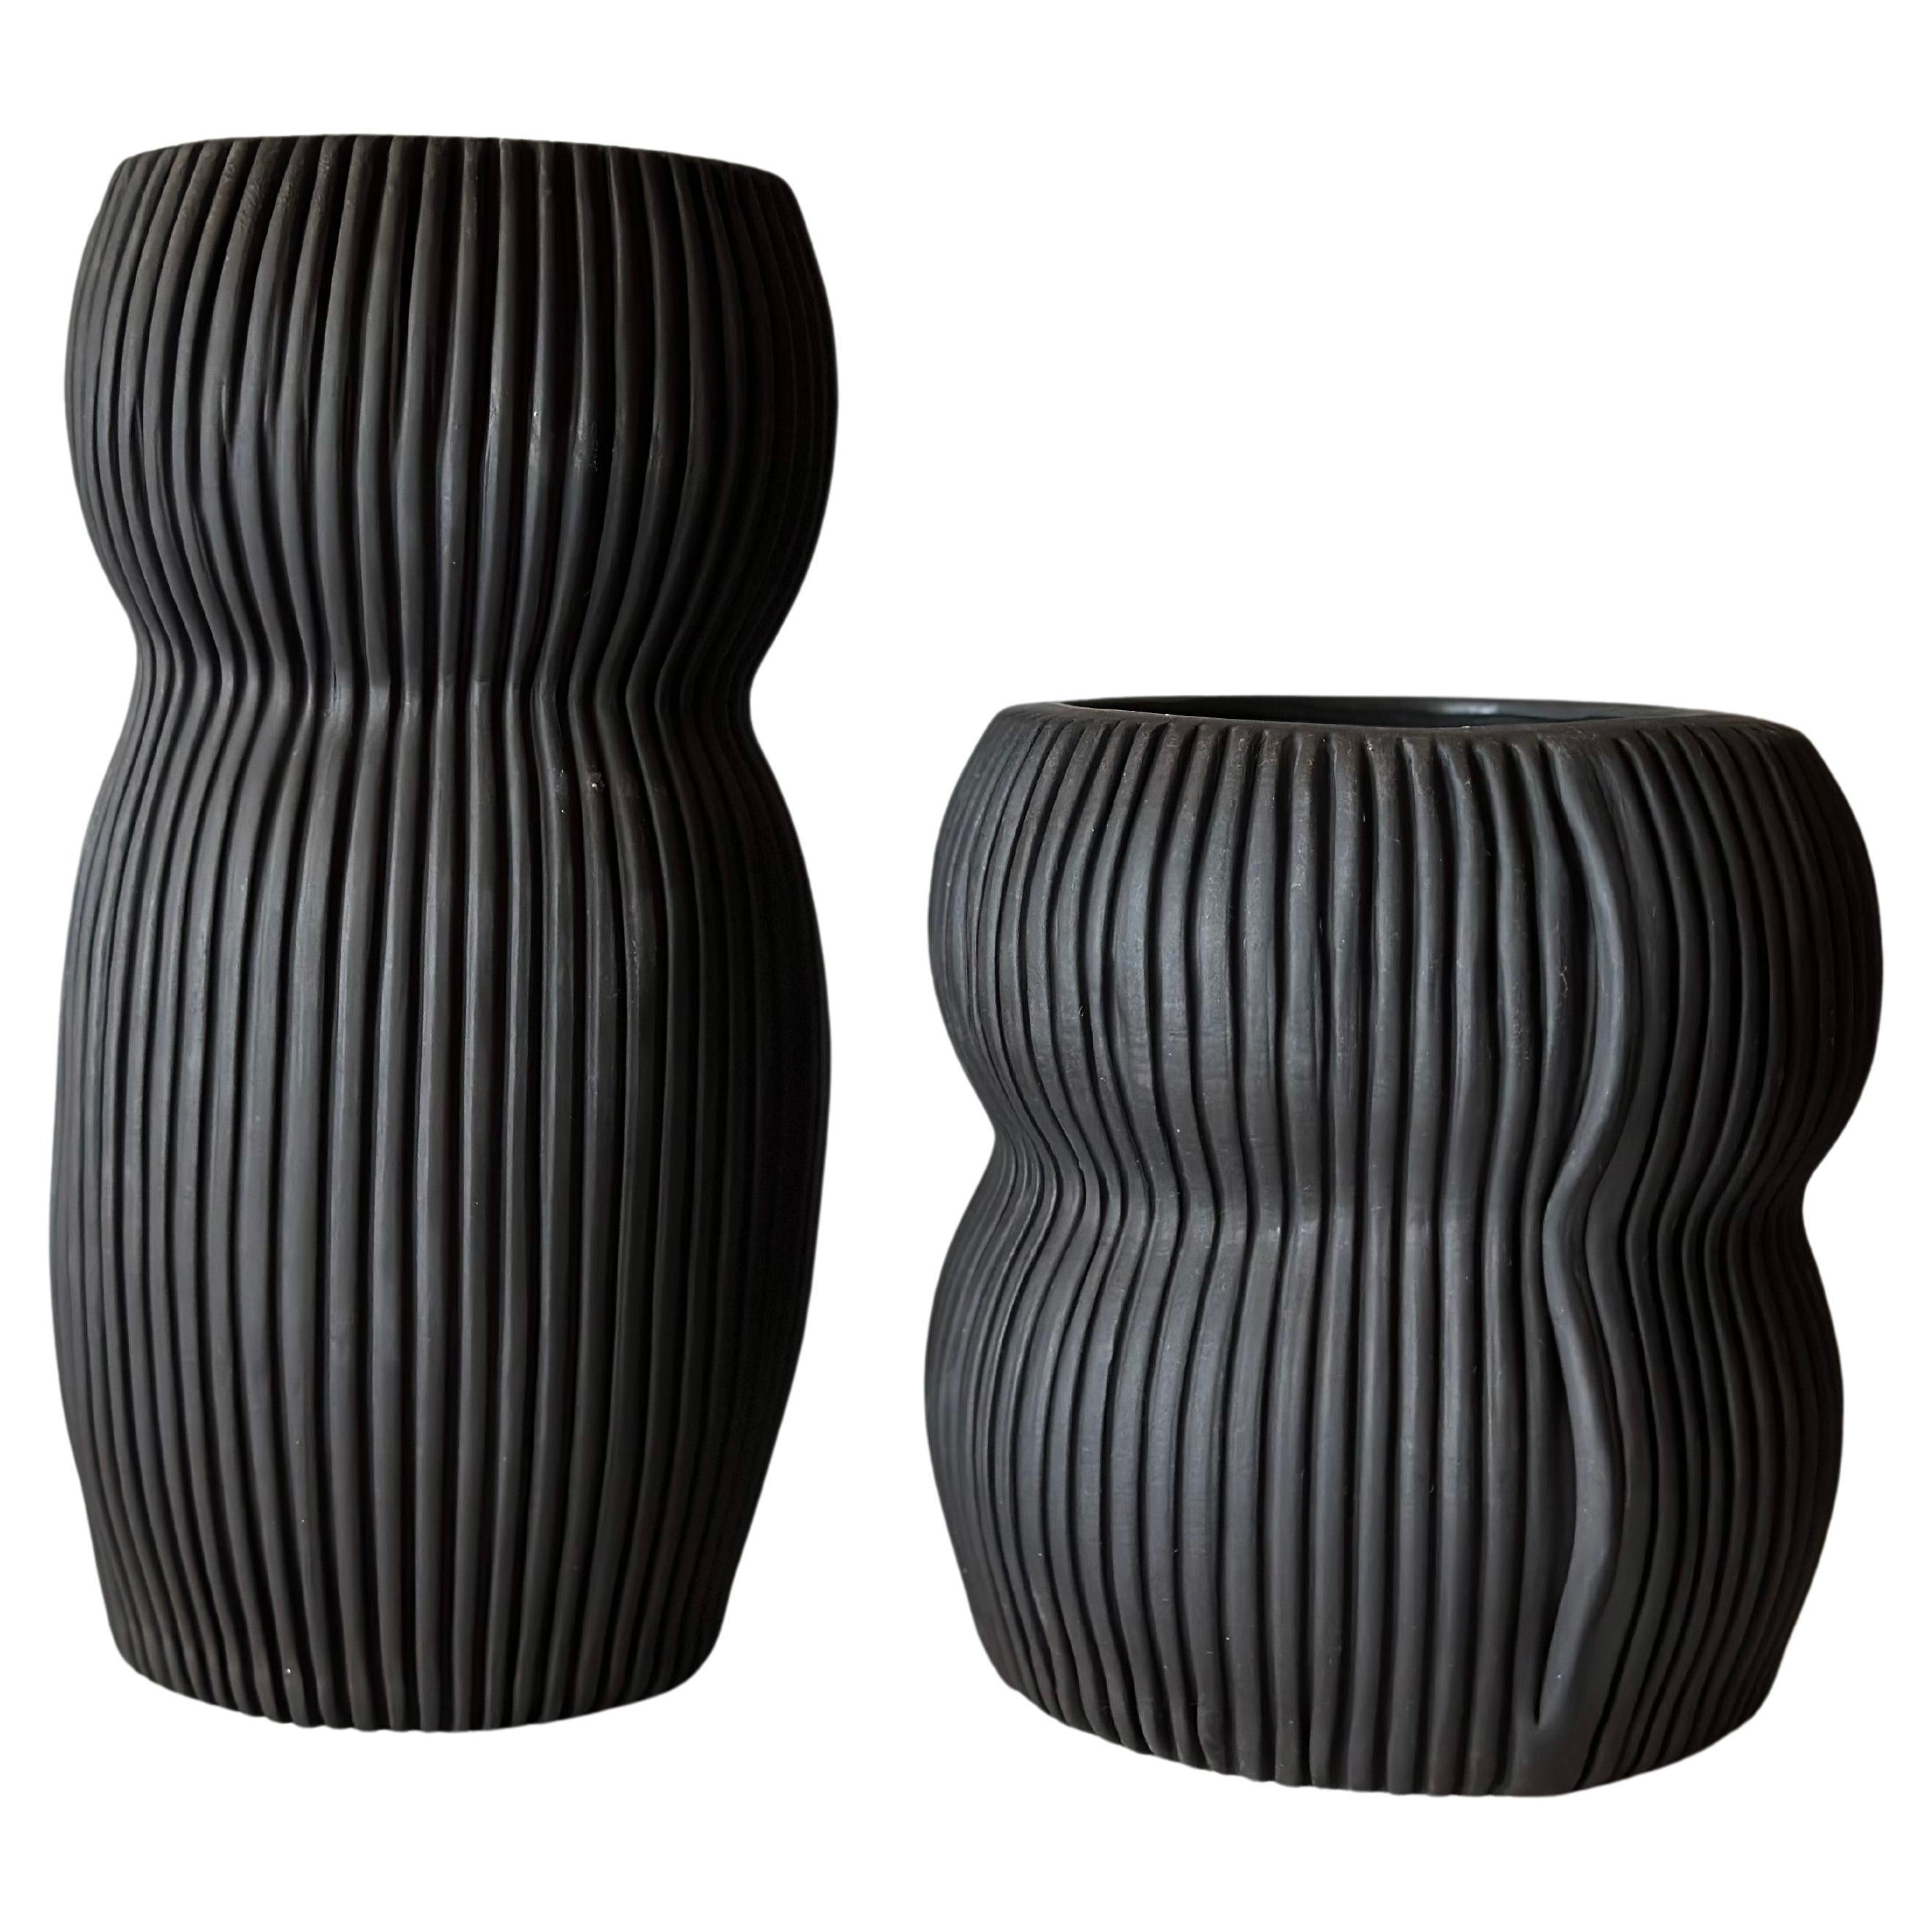 Pair of Curvy Textured Black Porcelain Vases by Cym Warkov For Sale